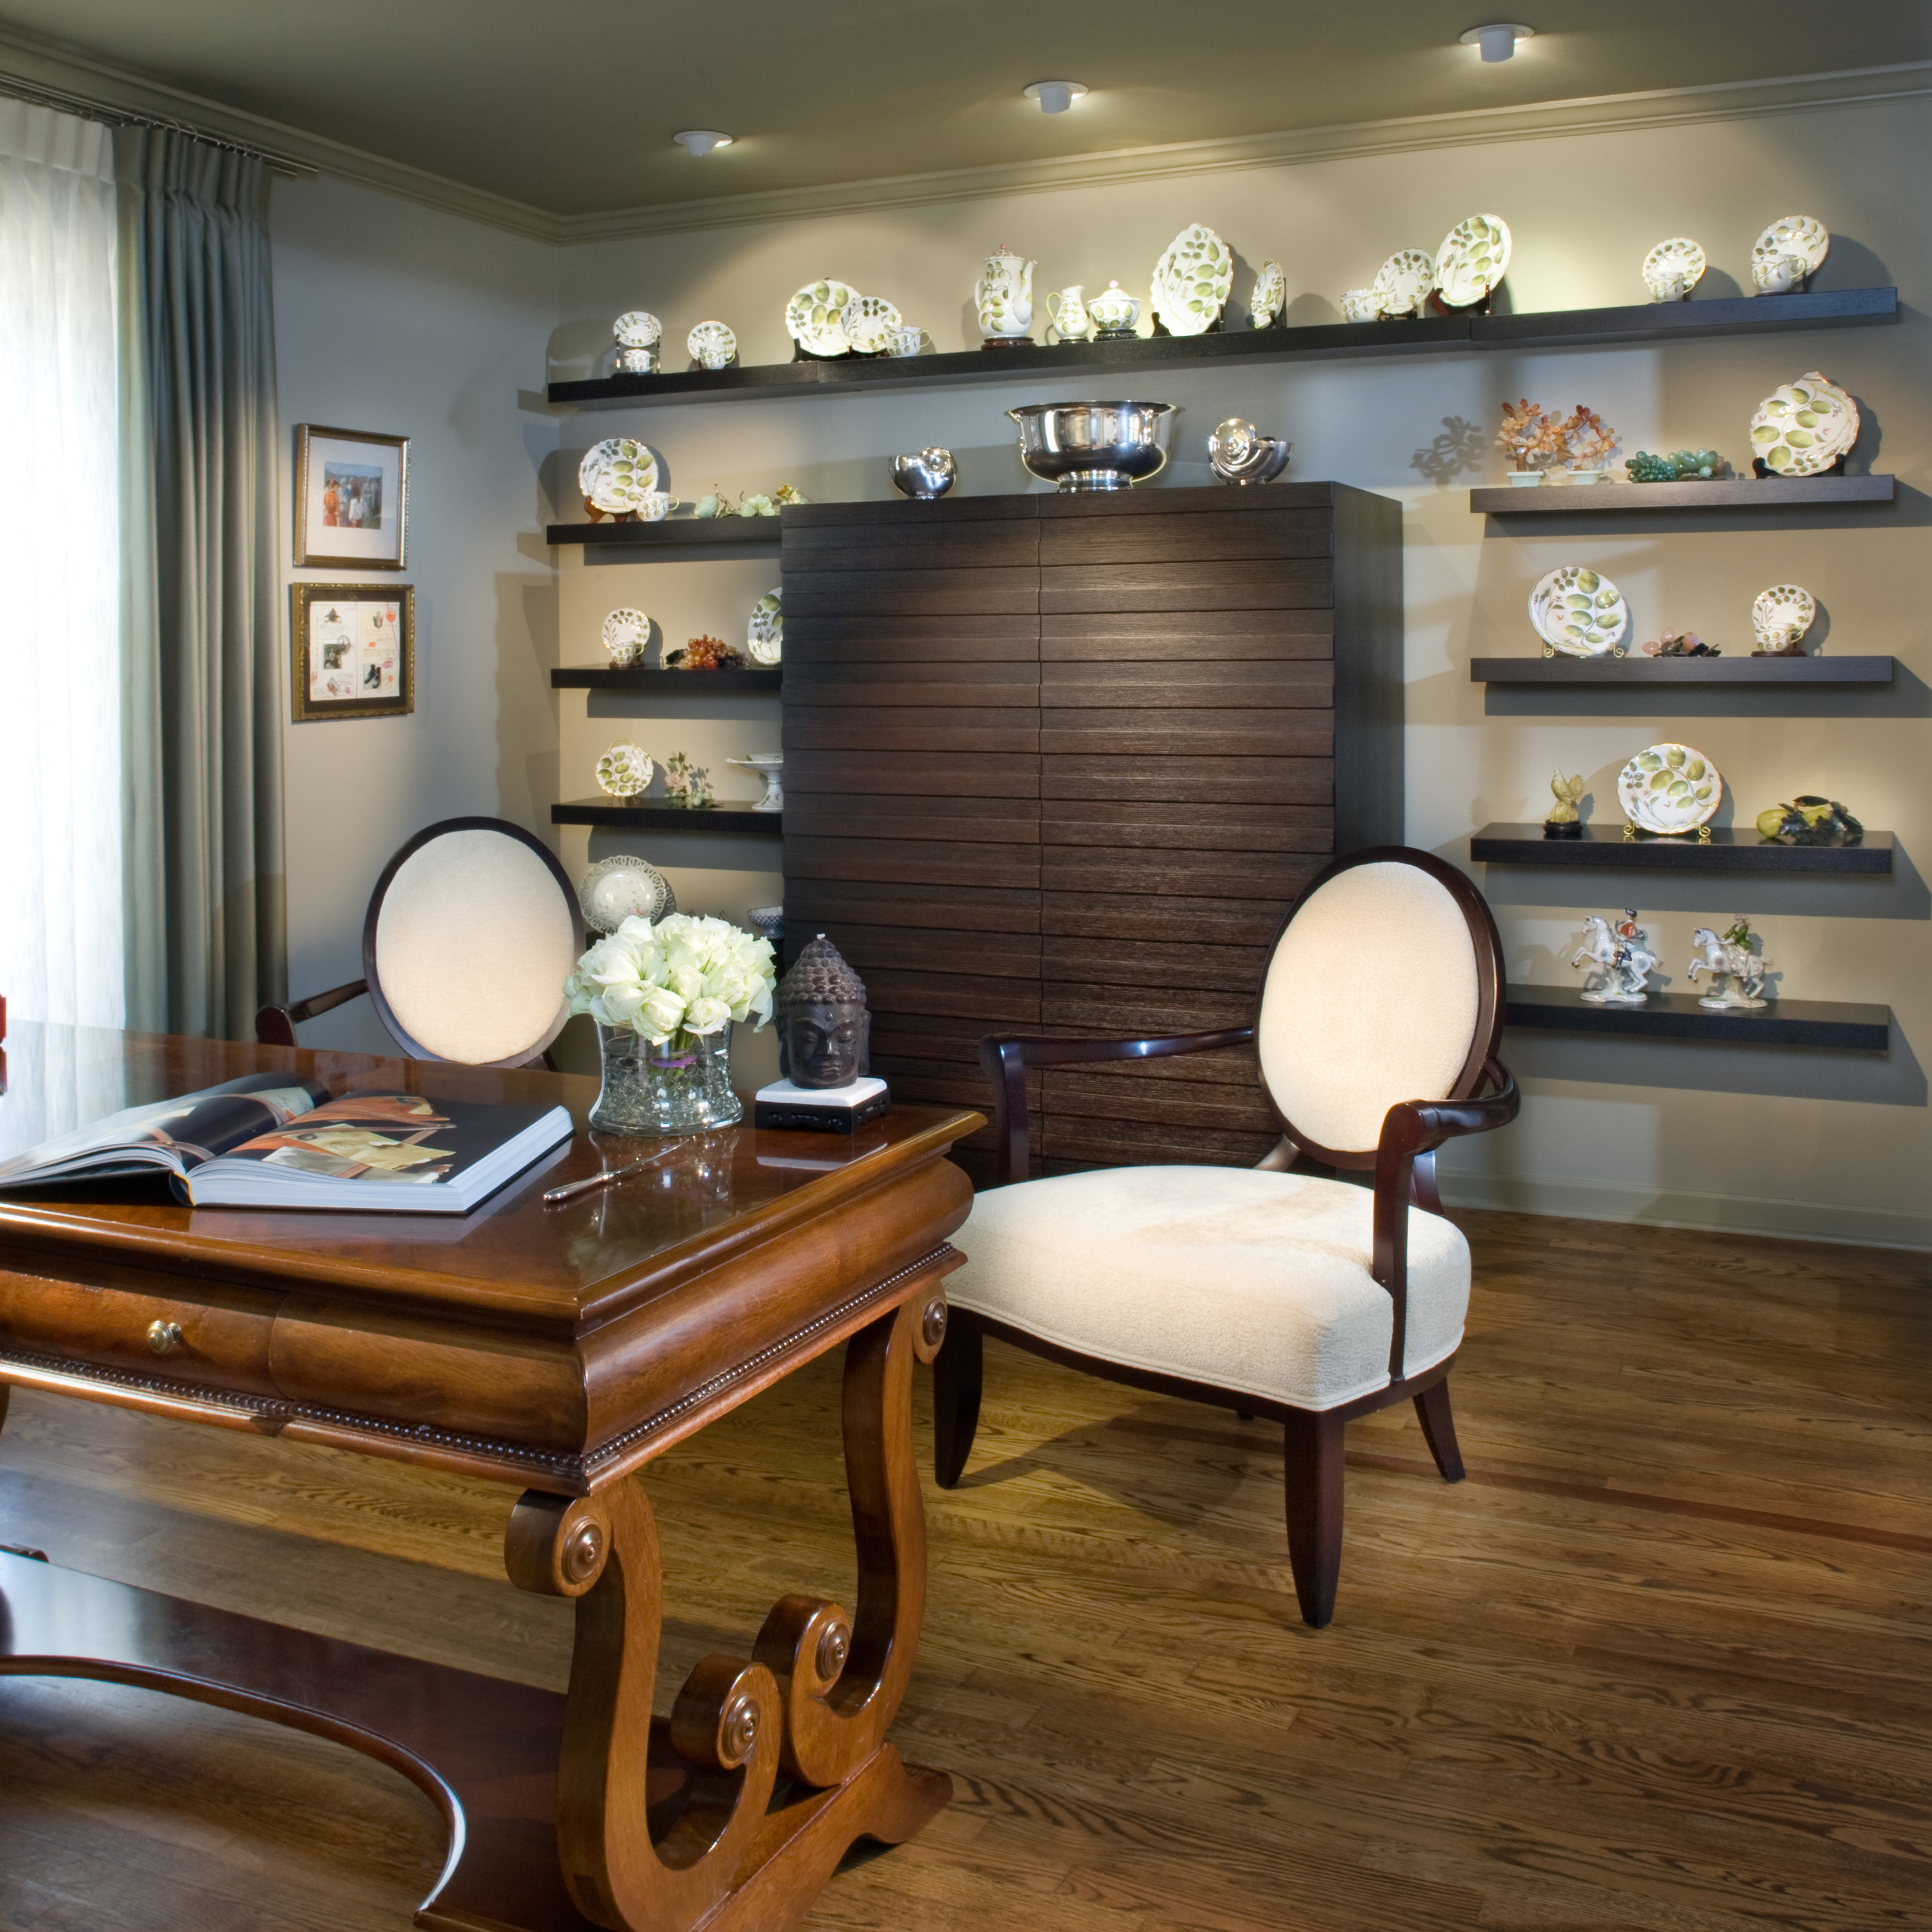 The client's antique china collection is displayed on upscale modern shelving, as opposed to dark curio cabinet.